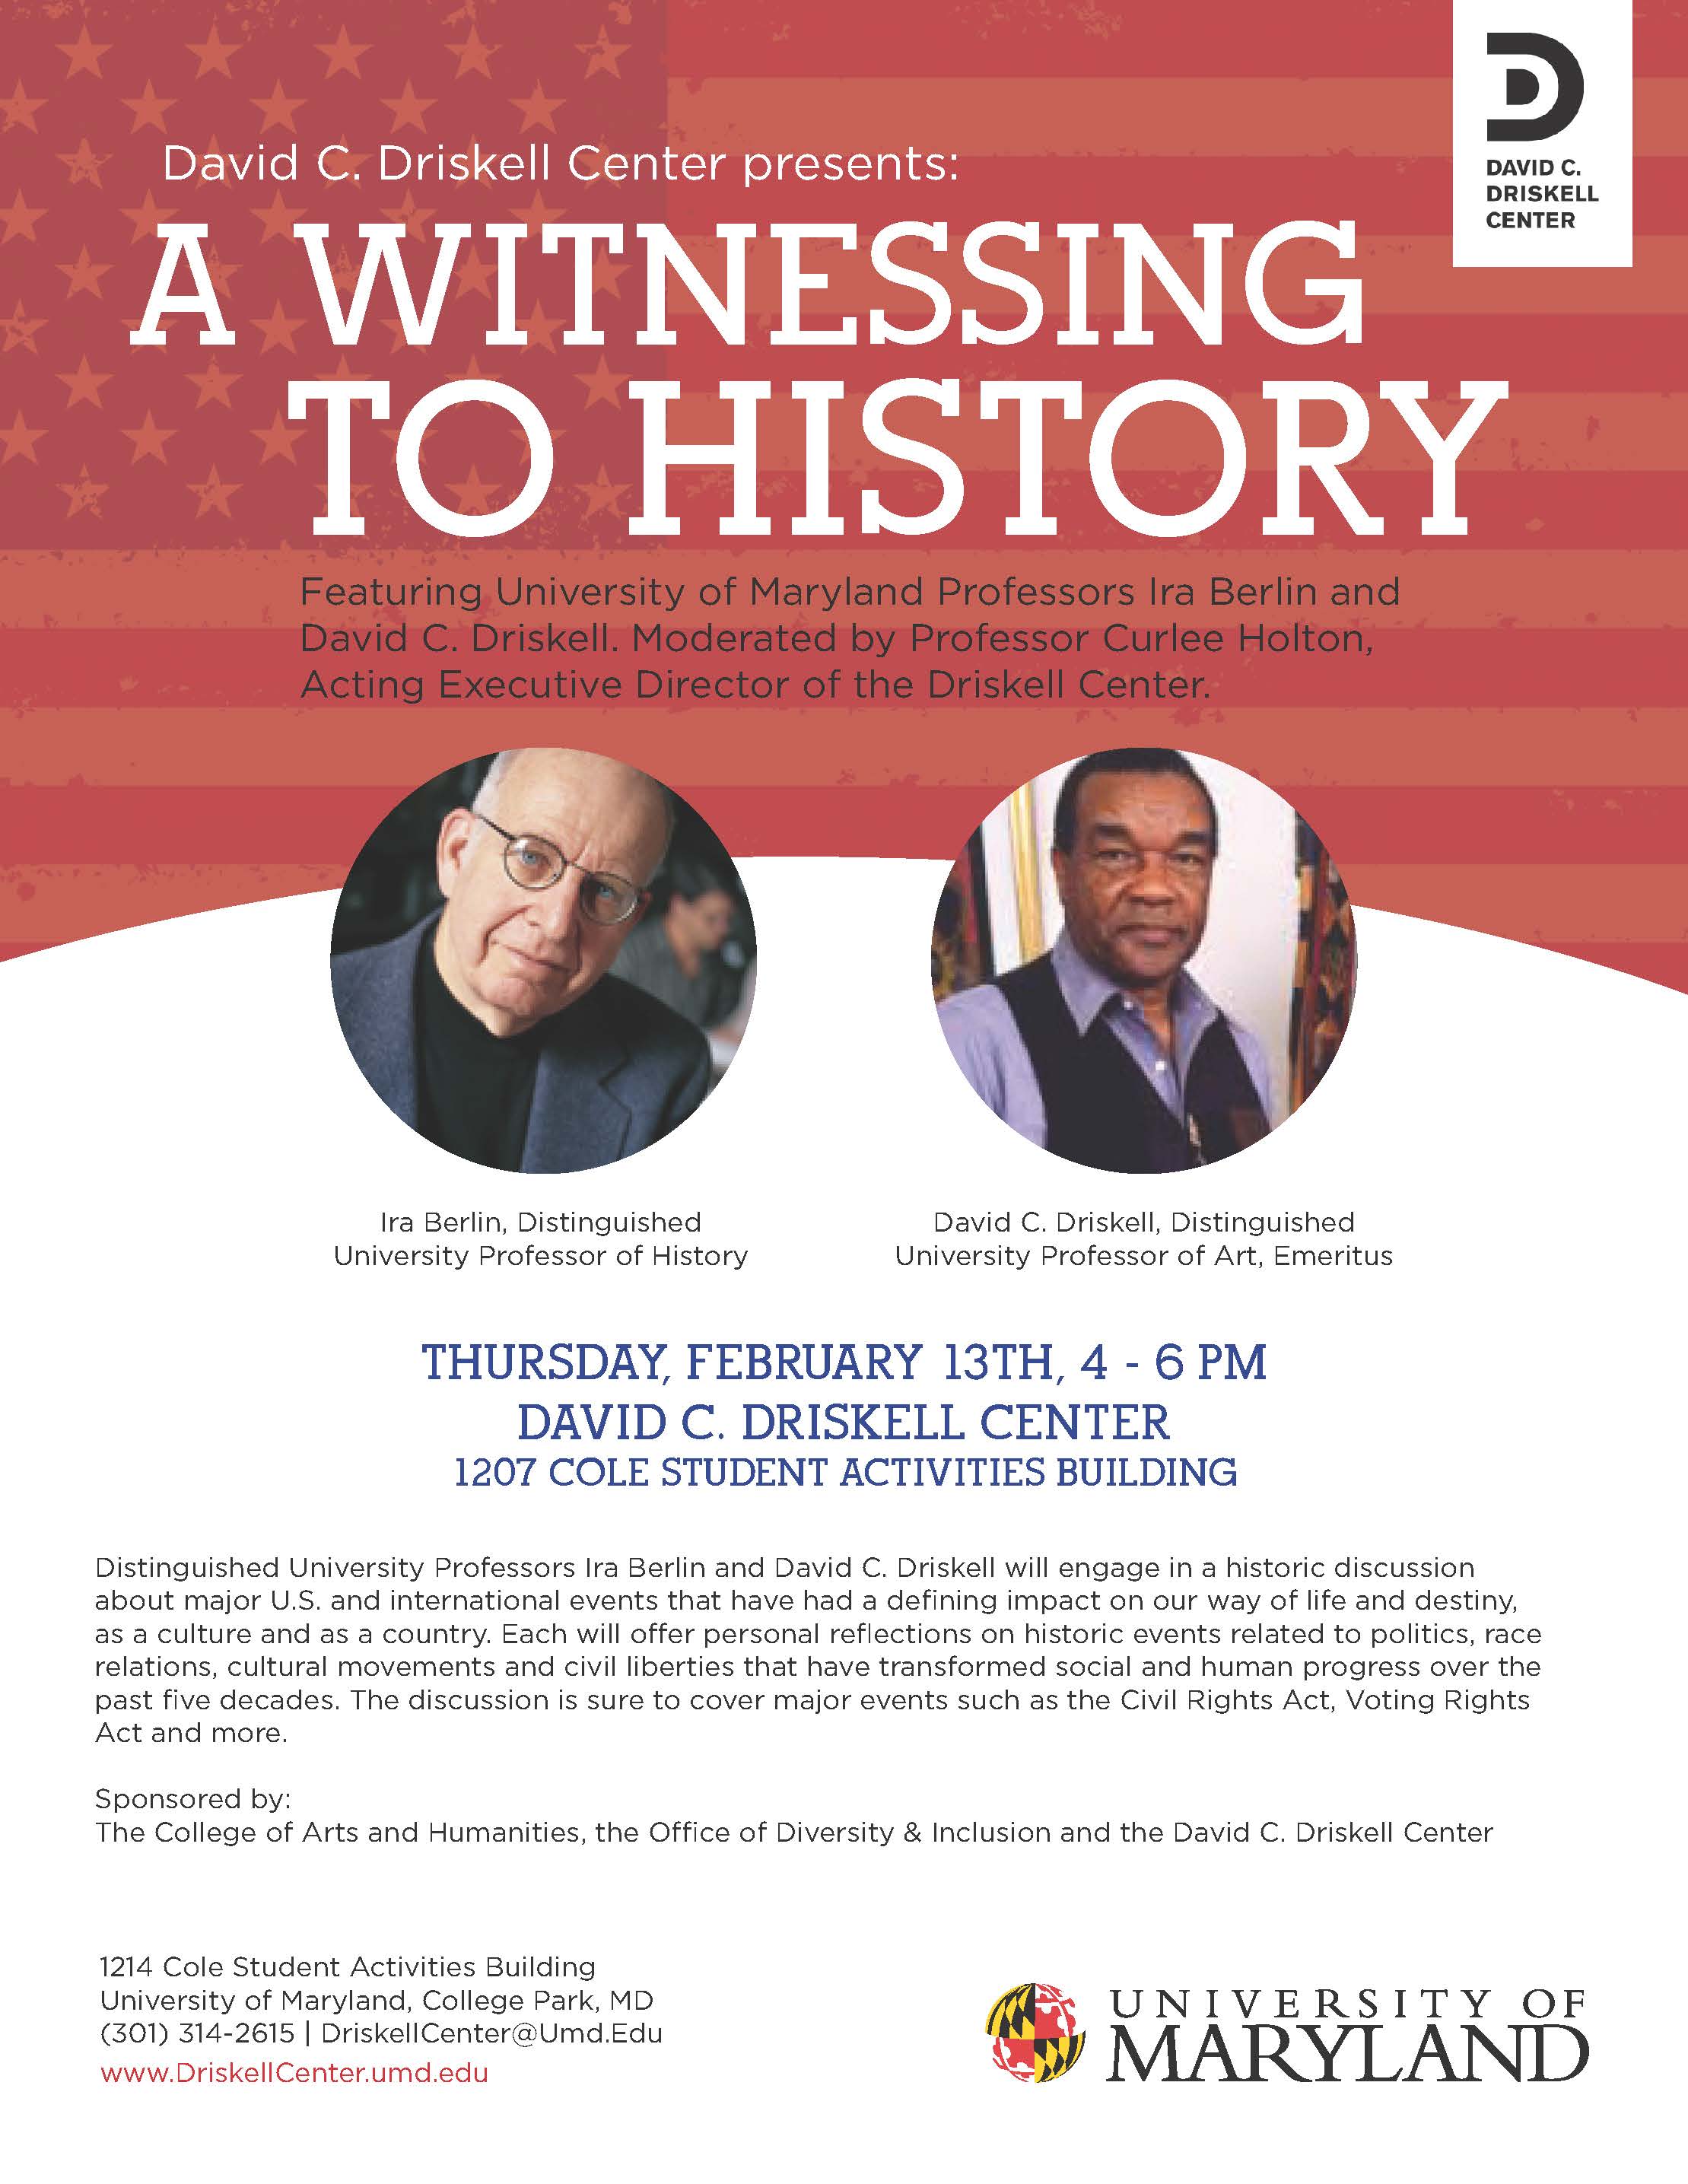 Image for event - A Witnessing To History